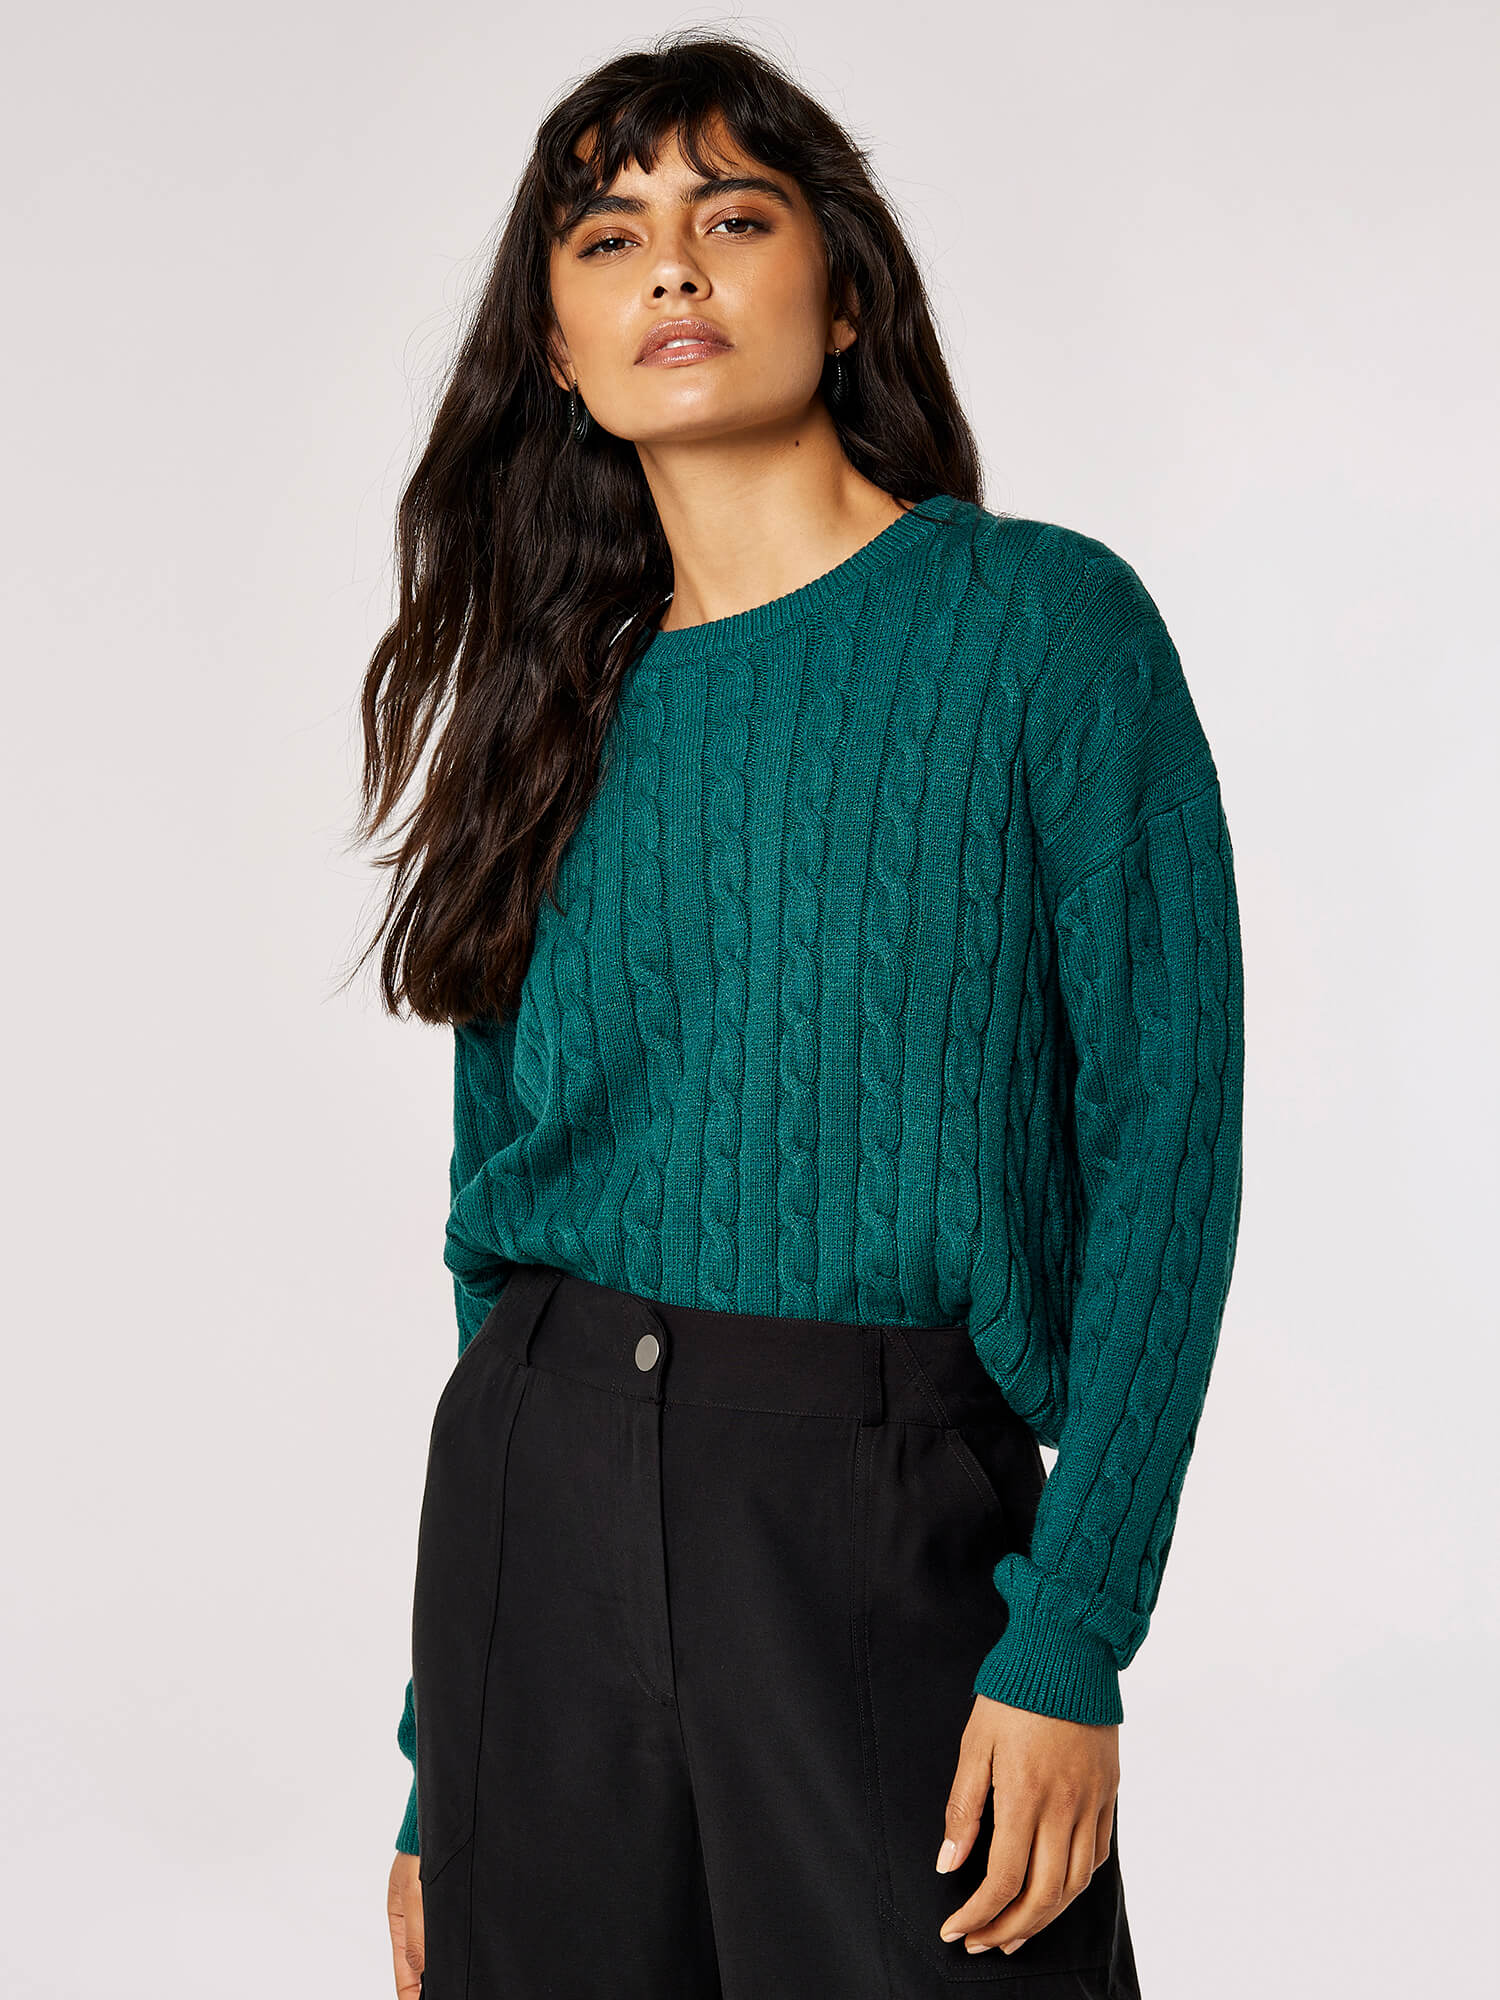 Aran Cable Knit Jumper | Apricot Clothing